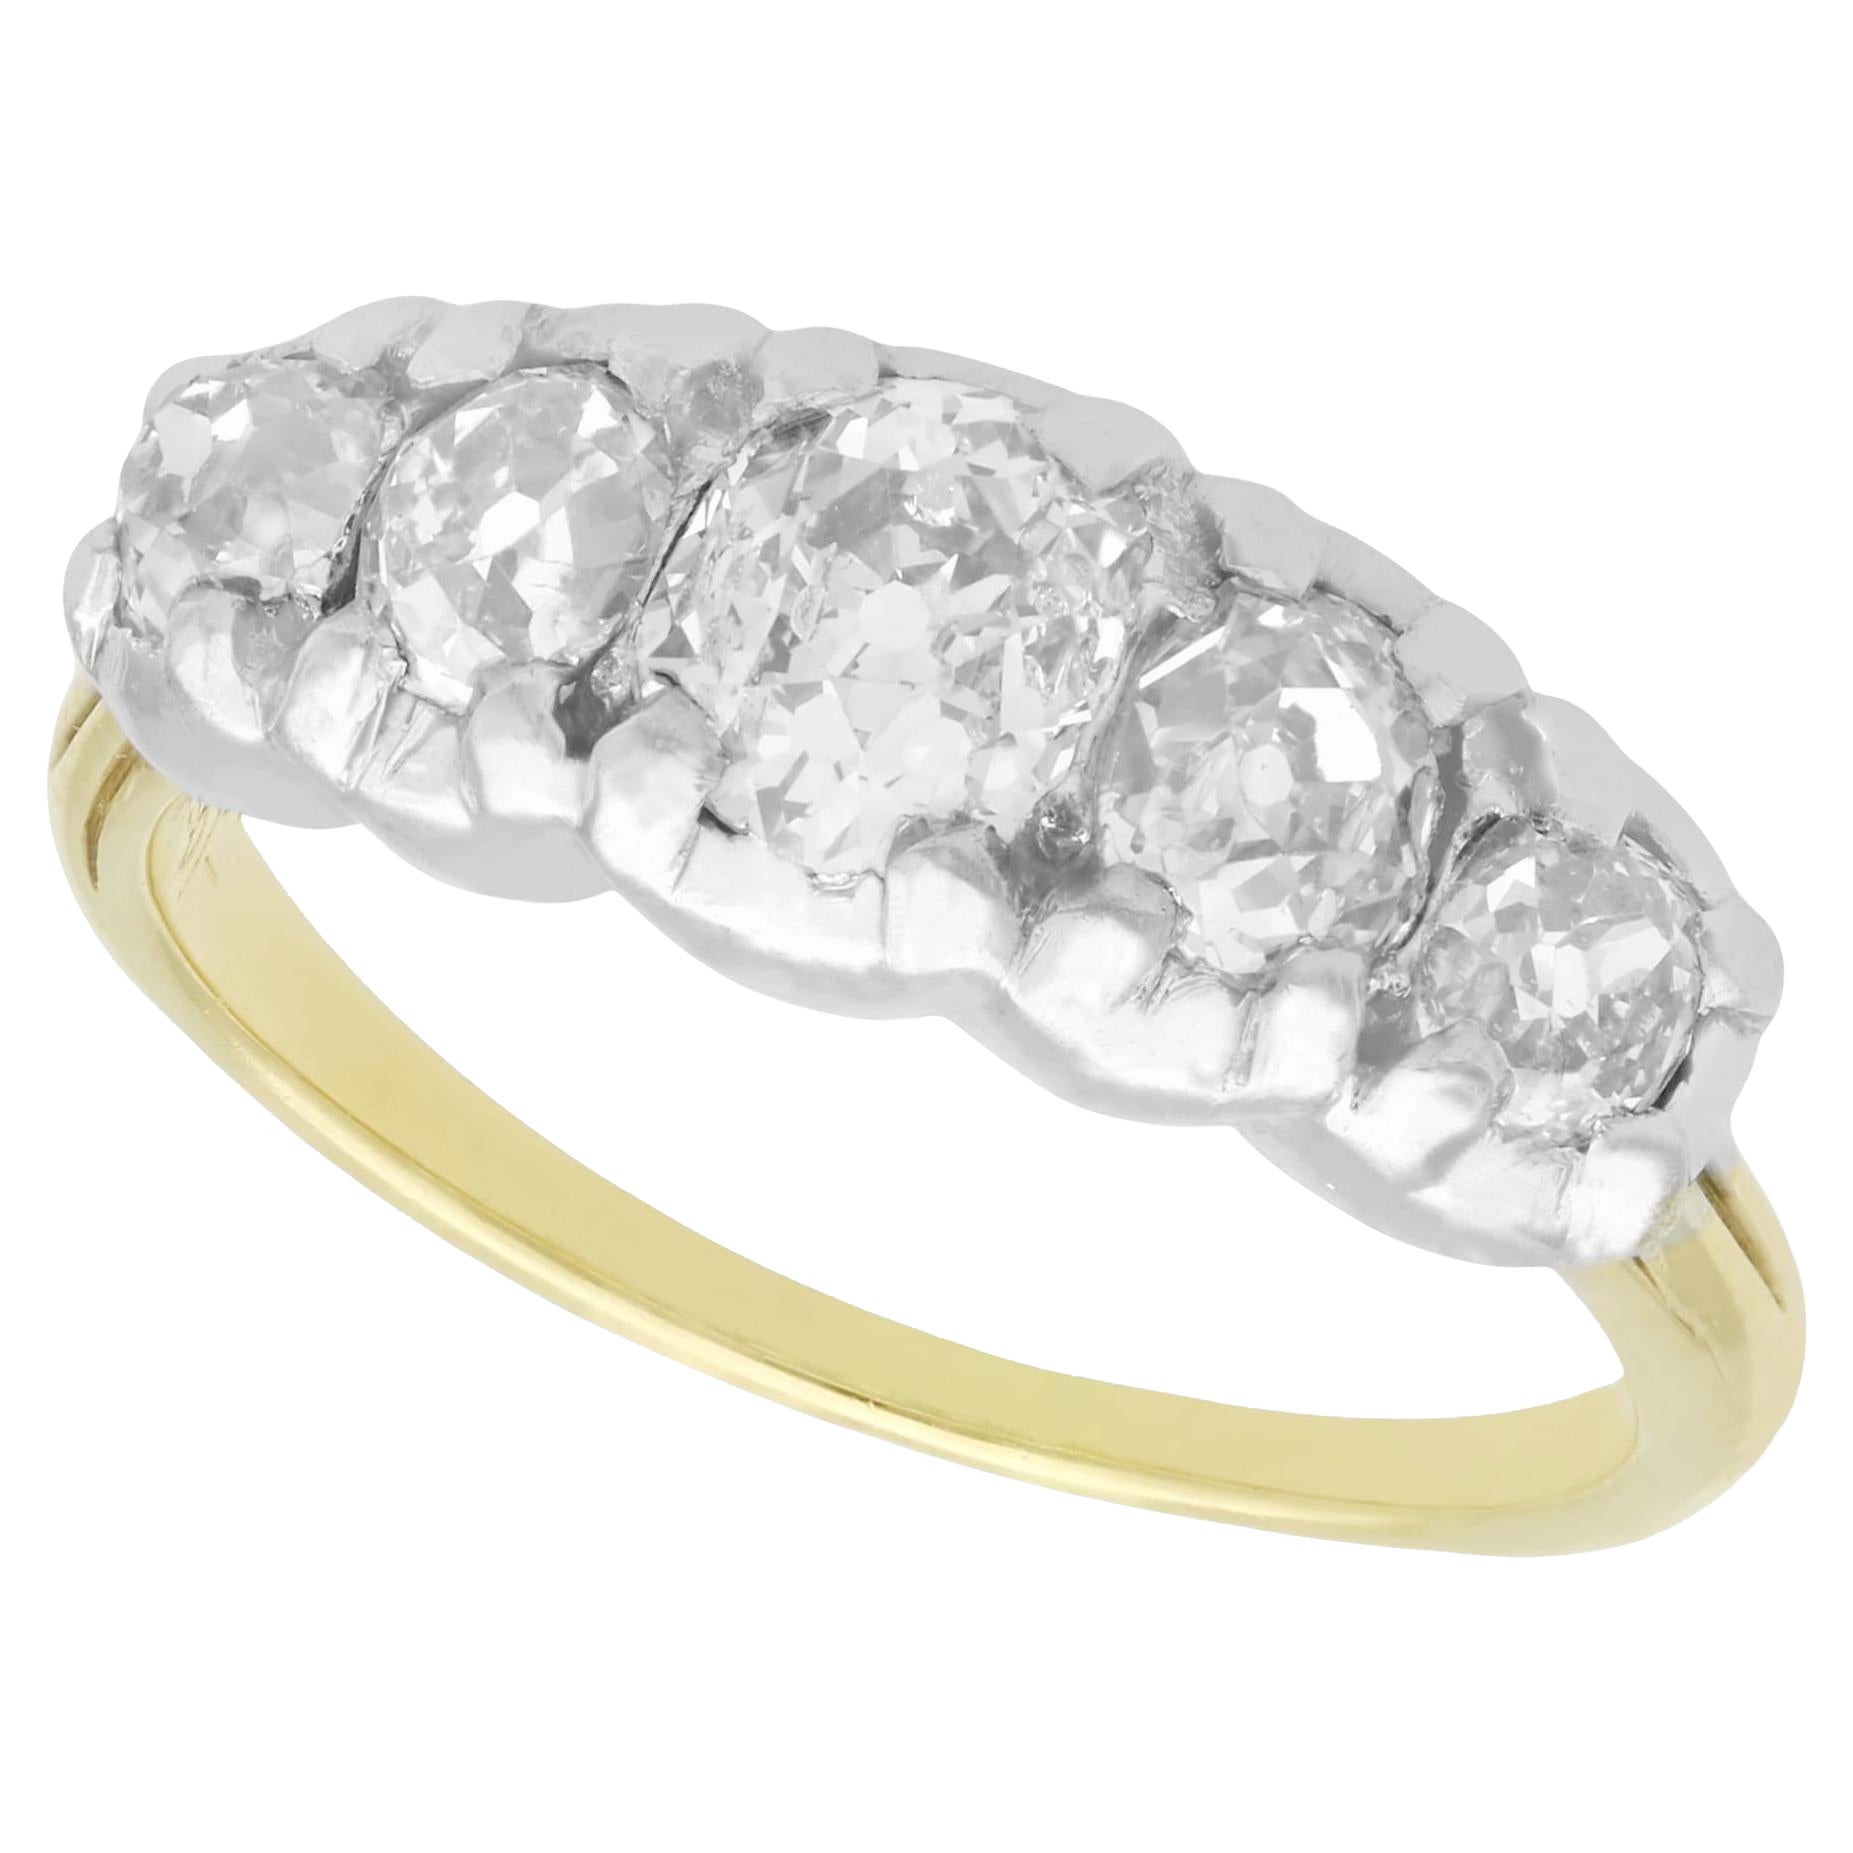 1900s 1.32 Carat Diamond and Yellow Gold Five Stone Ring For Sale